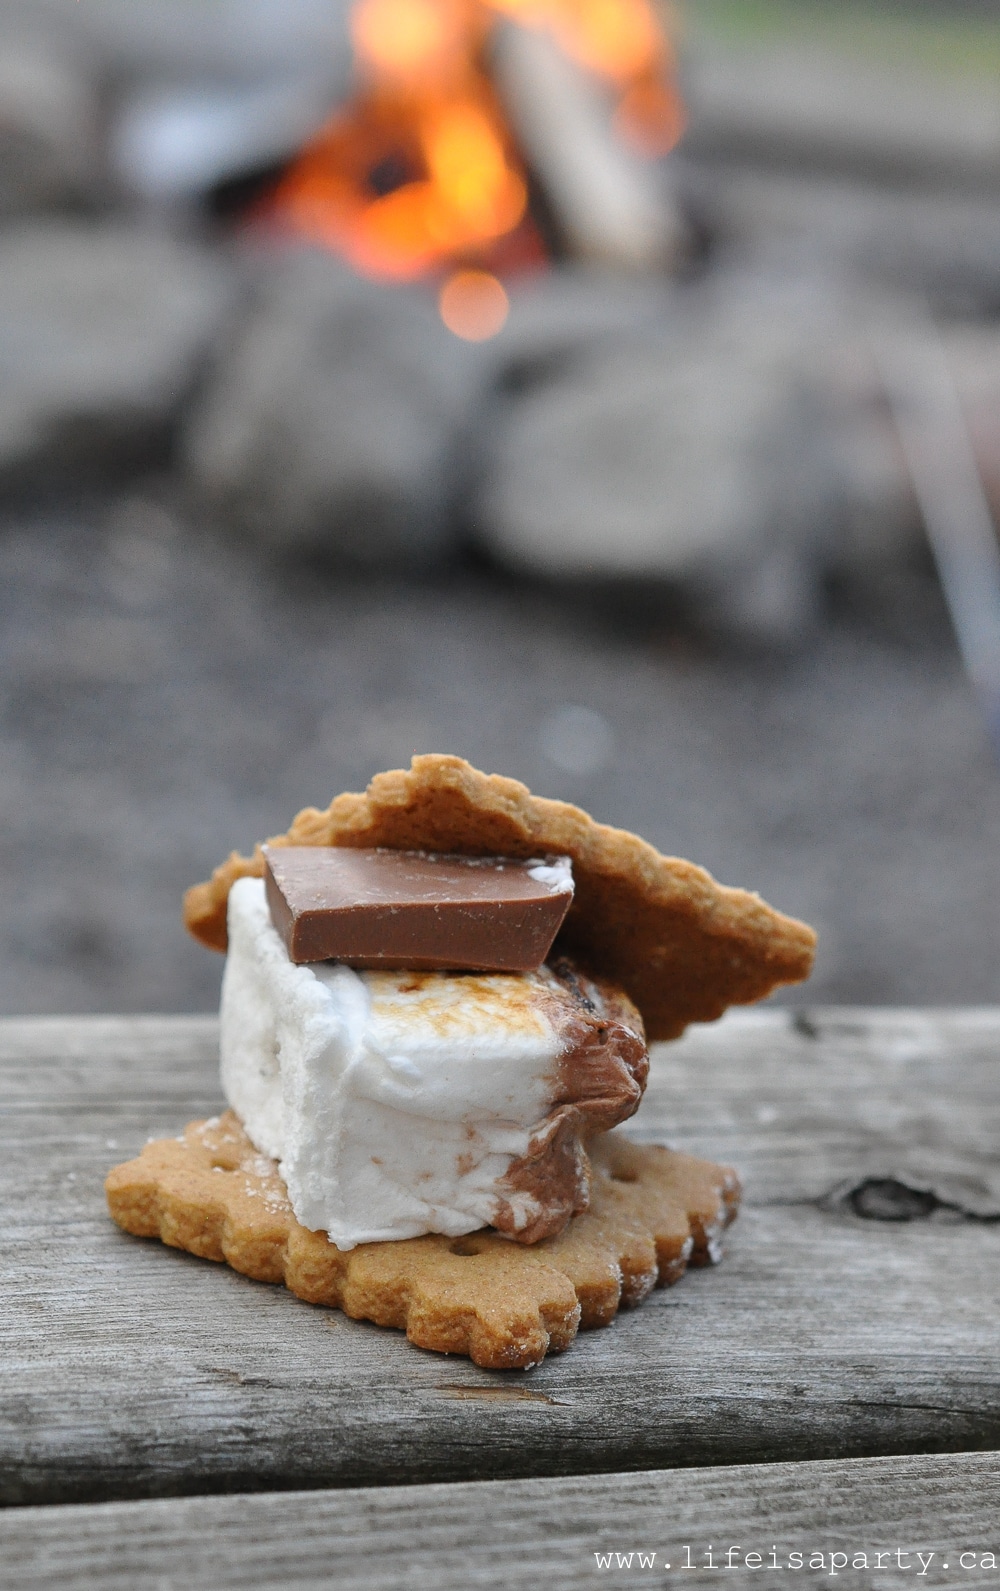 gourmet s'more with homemade marshmallows